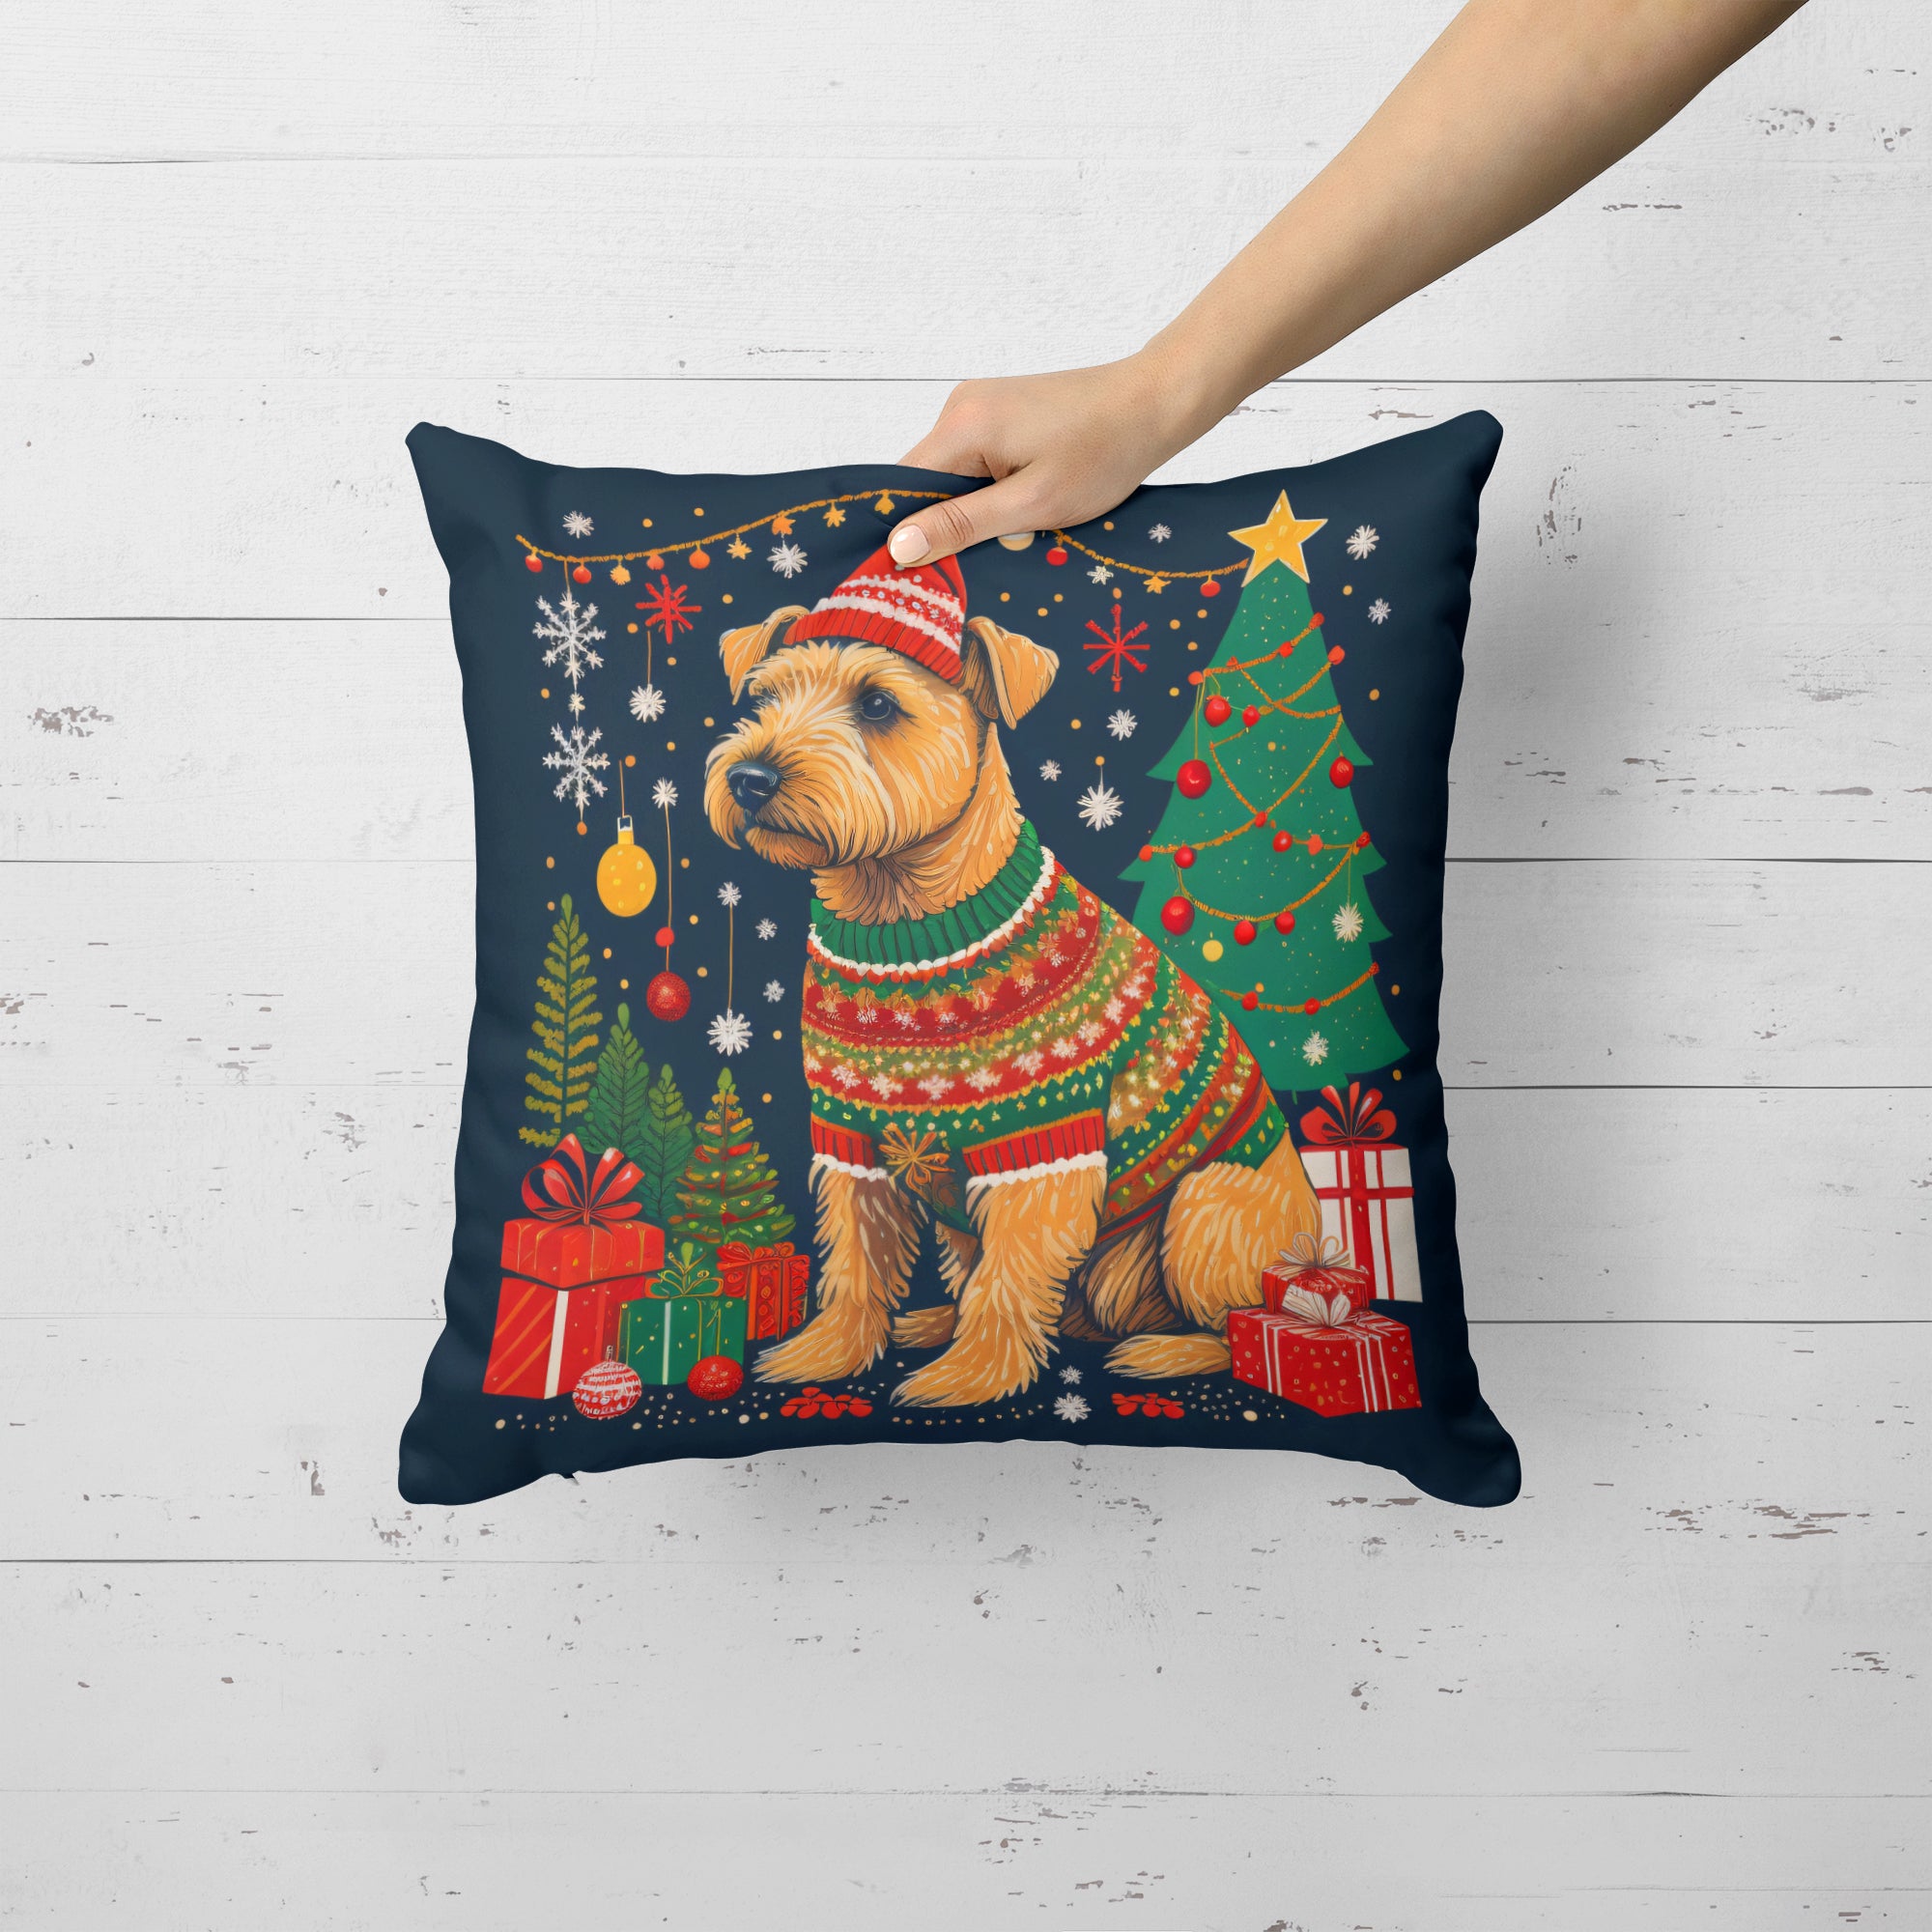 Buy this Lakeland Terrier Christmas Fabric Decorative Pillow